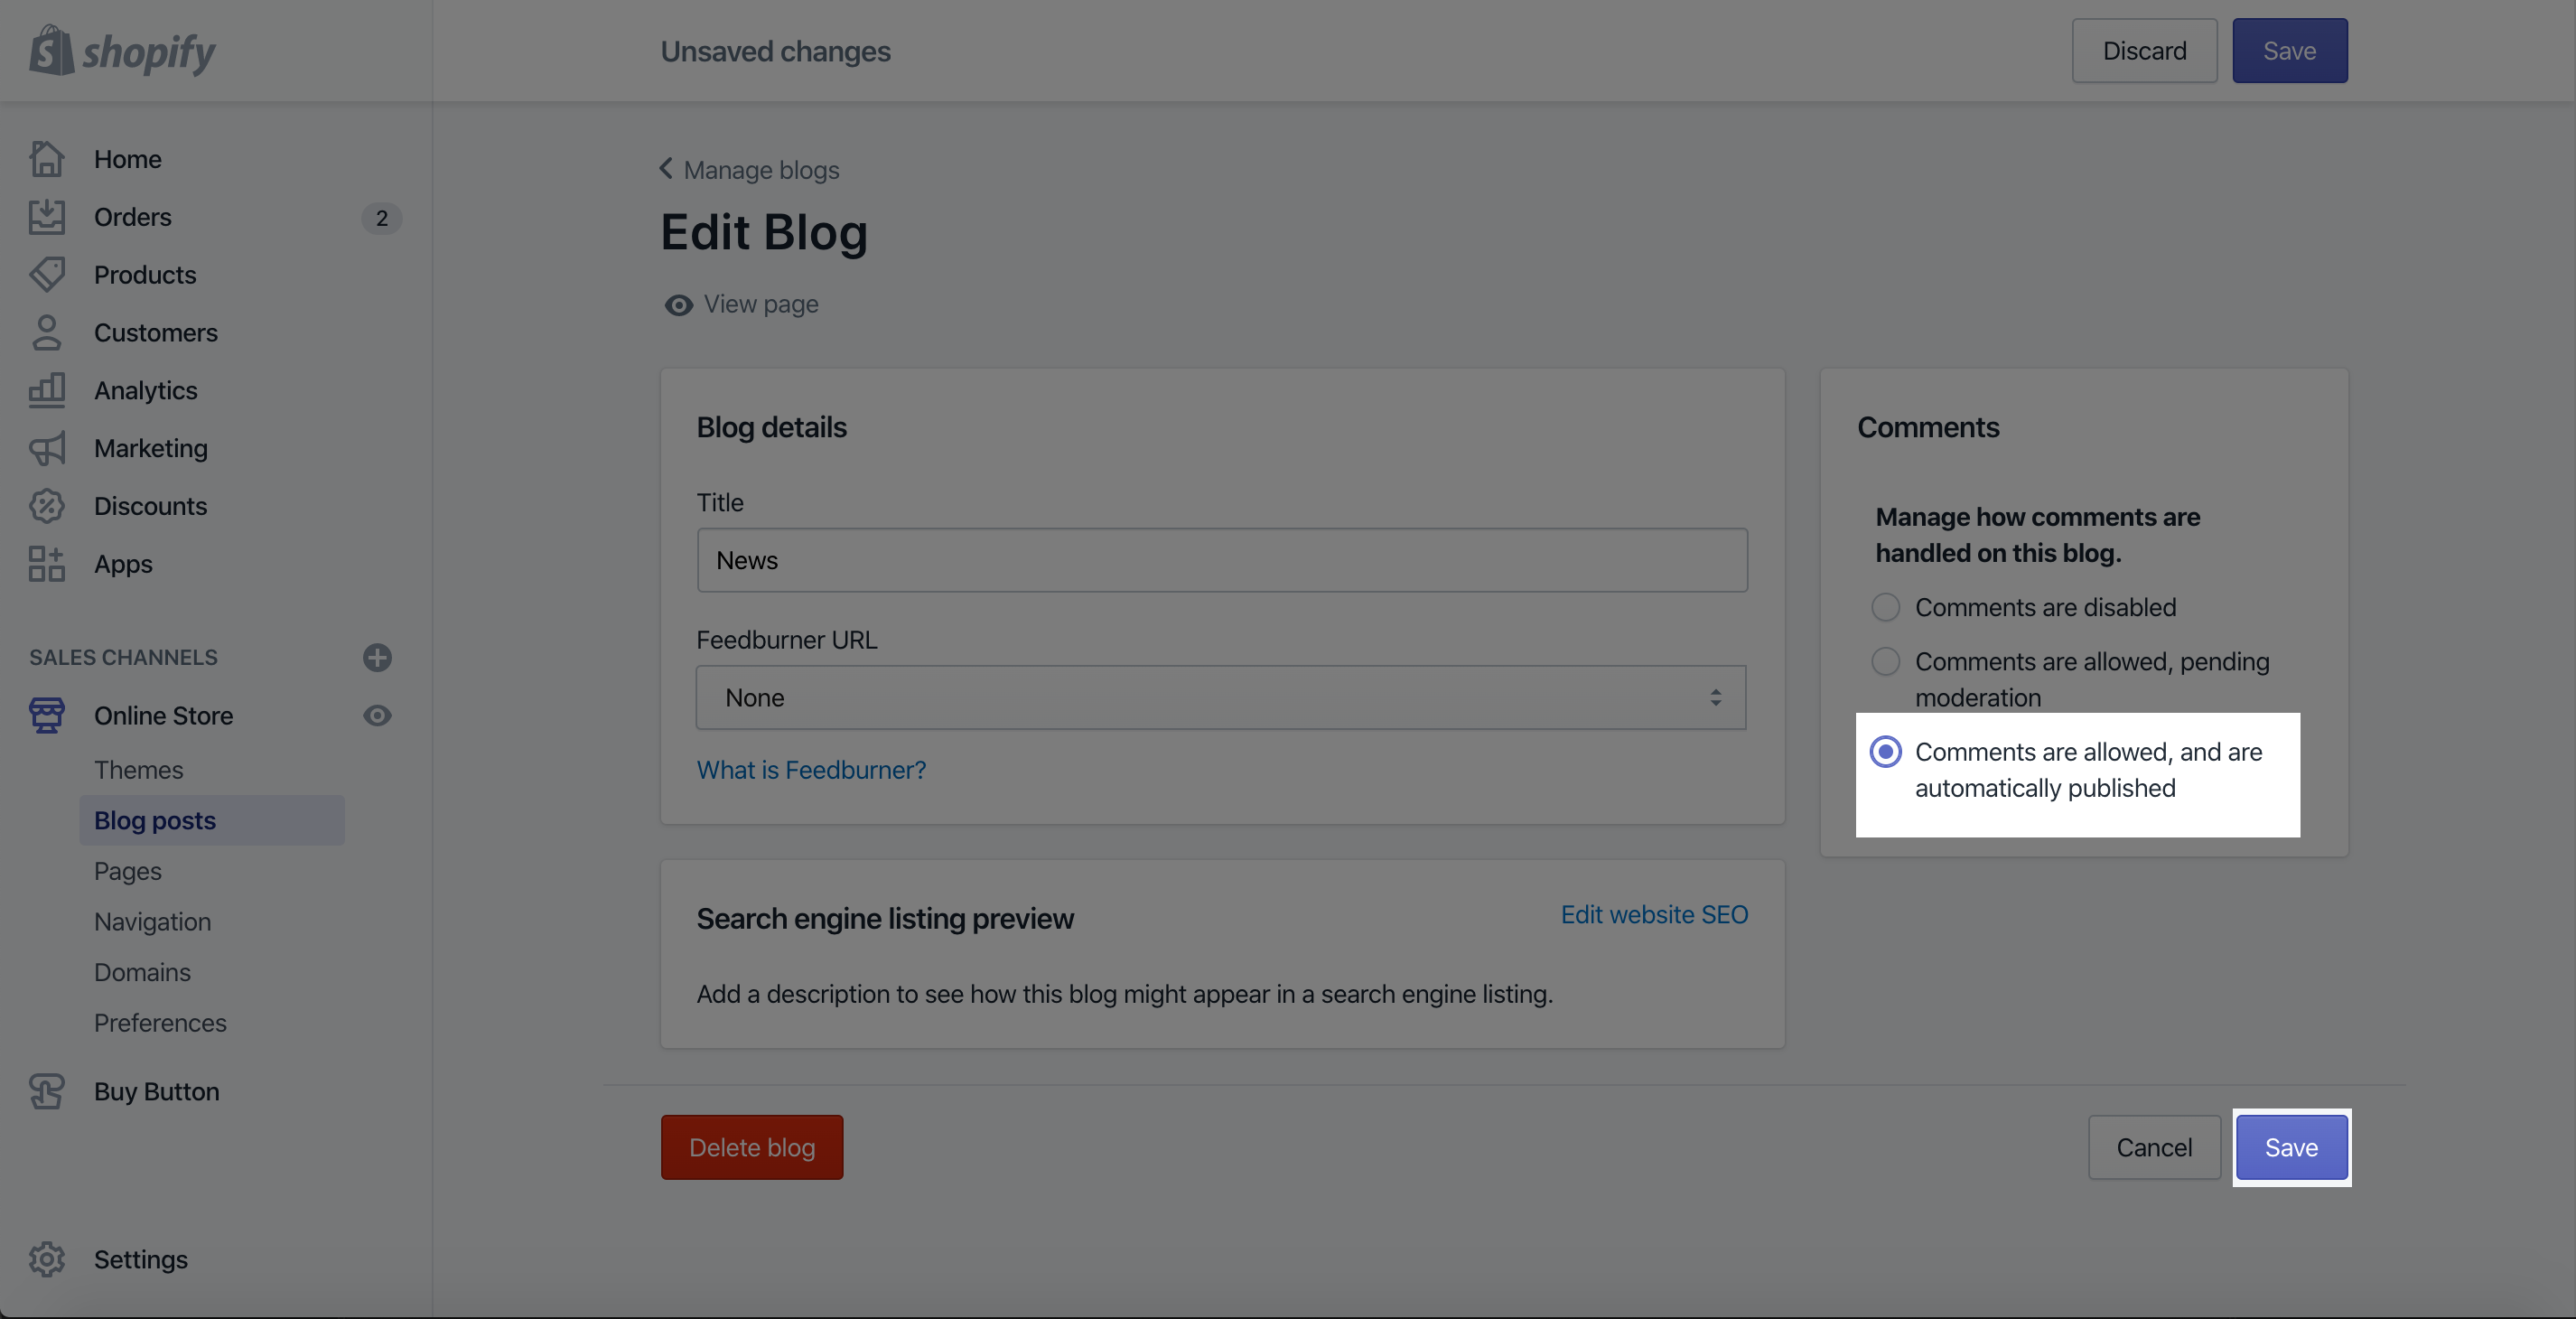 Creating a blog post page to build quality content and grow sales